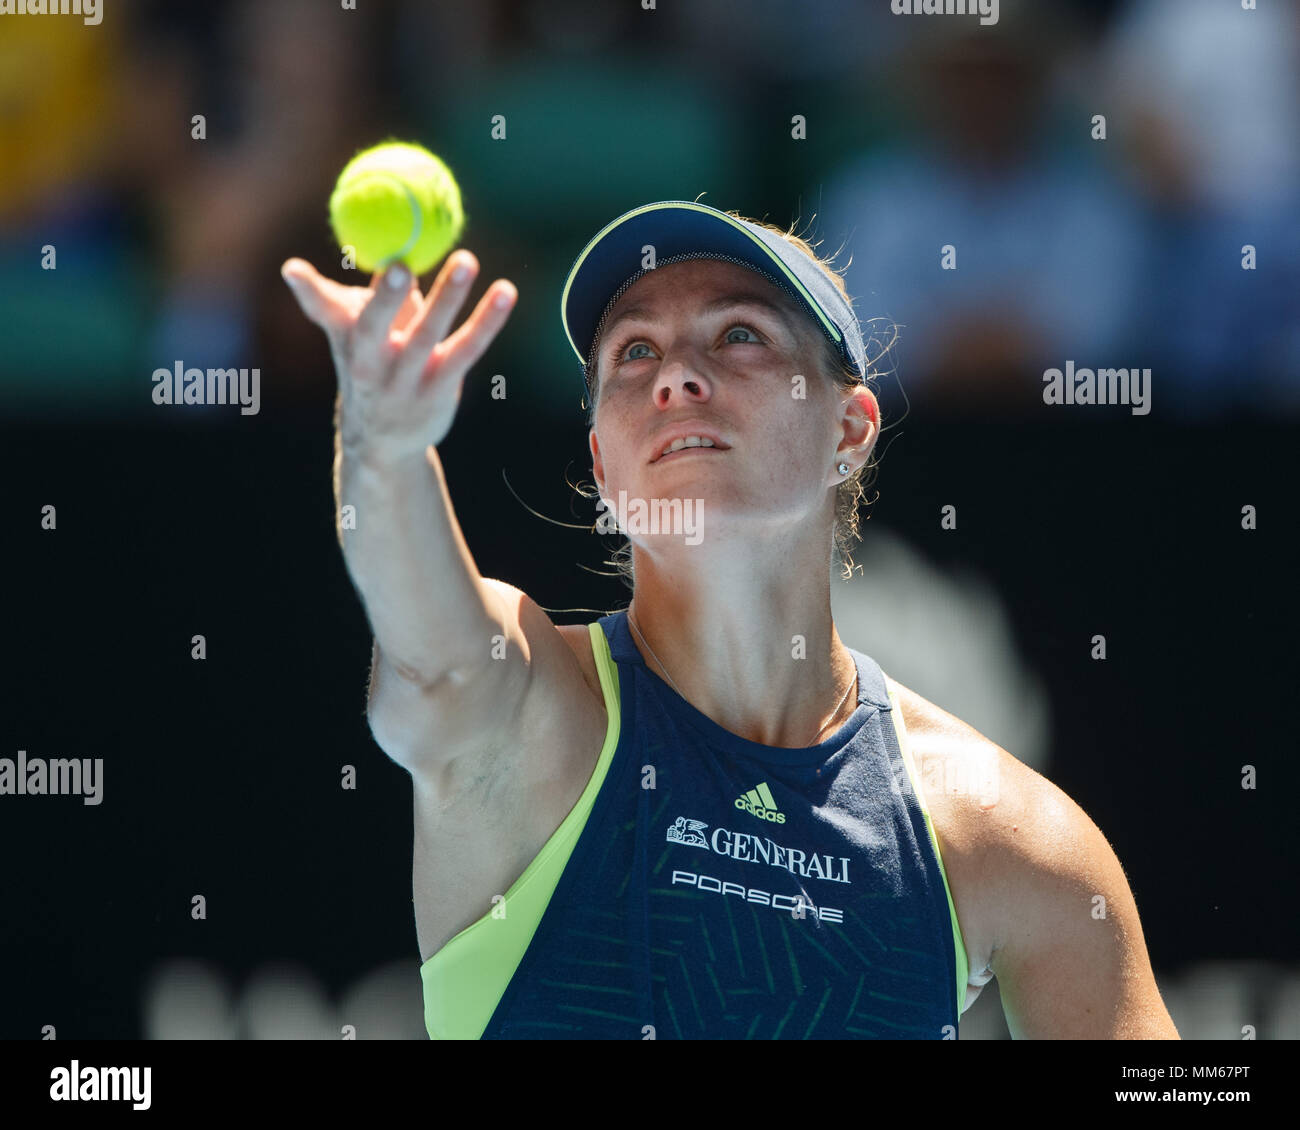 Tage med antenne Adgang German tennis player Angelique Kerber serving a ball during women's singles  match in Australian Open 2018 Tennis Tournament, Melbourne Park, Melbourne  Stock Photo - Alamy